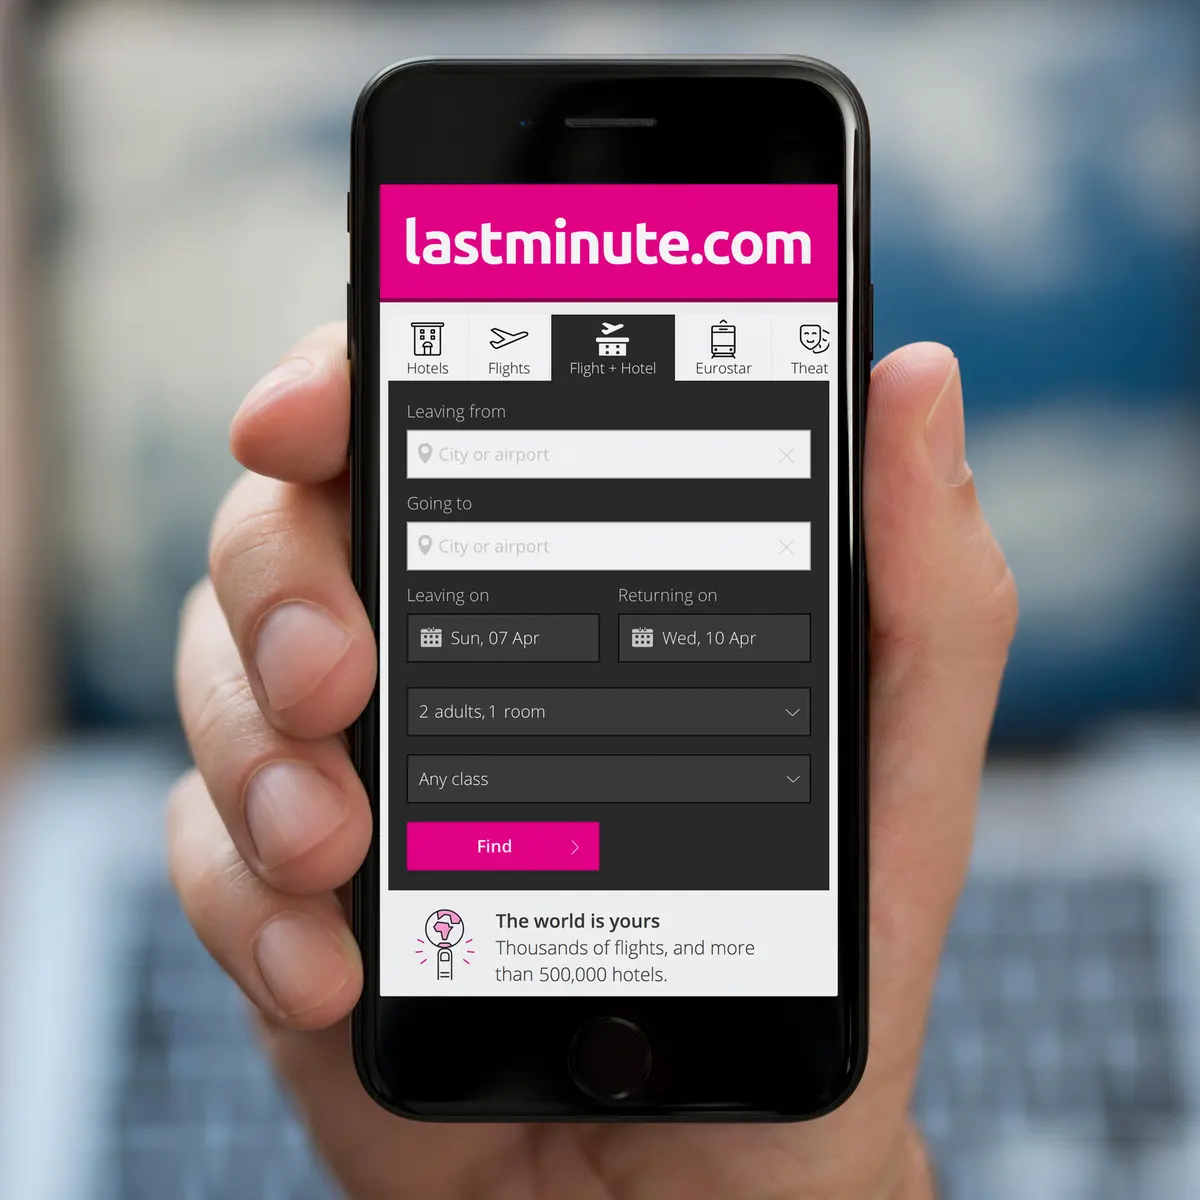 Lastminute.com €50 Gift Card IE